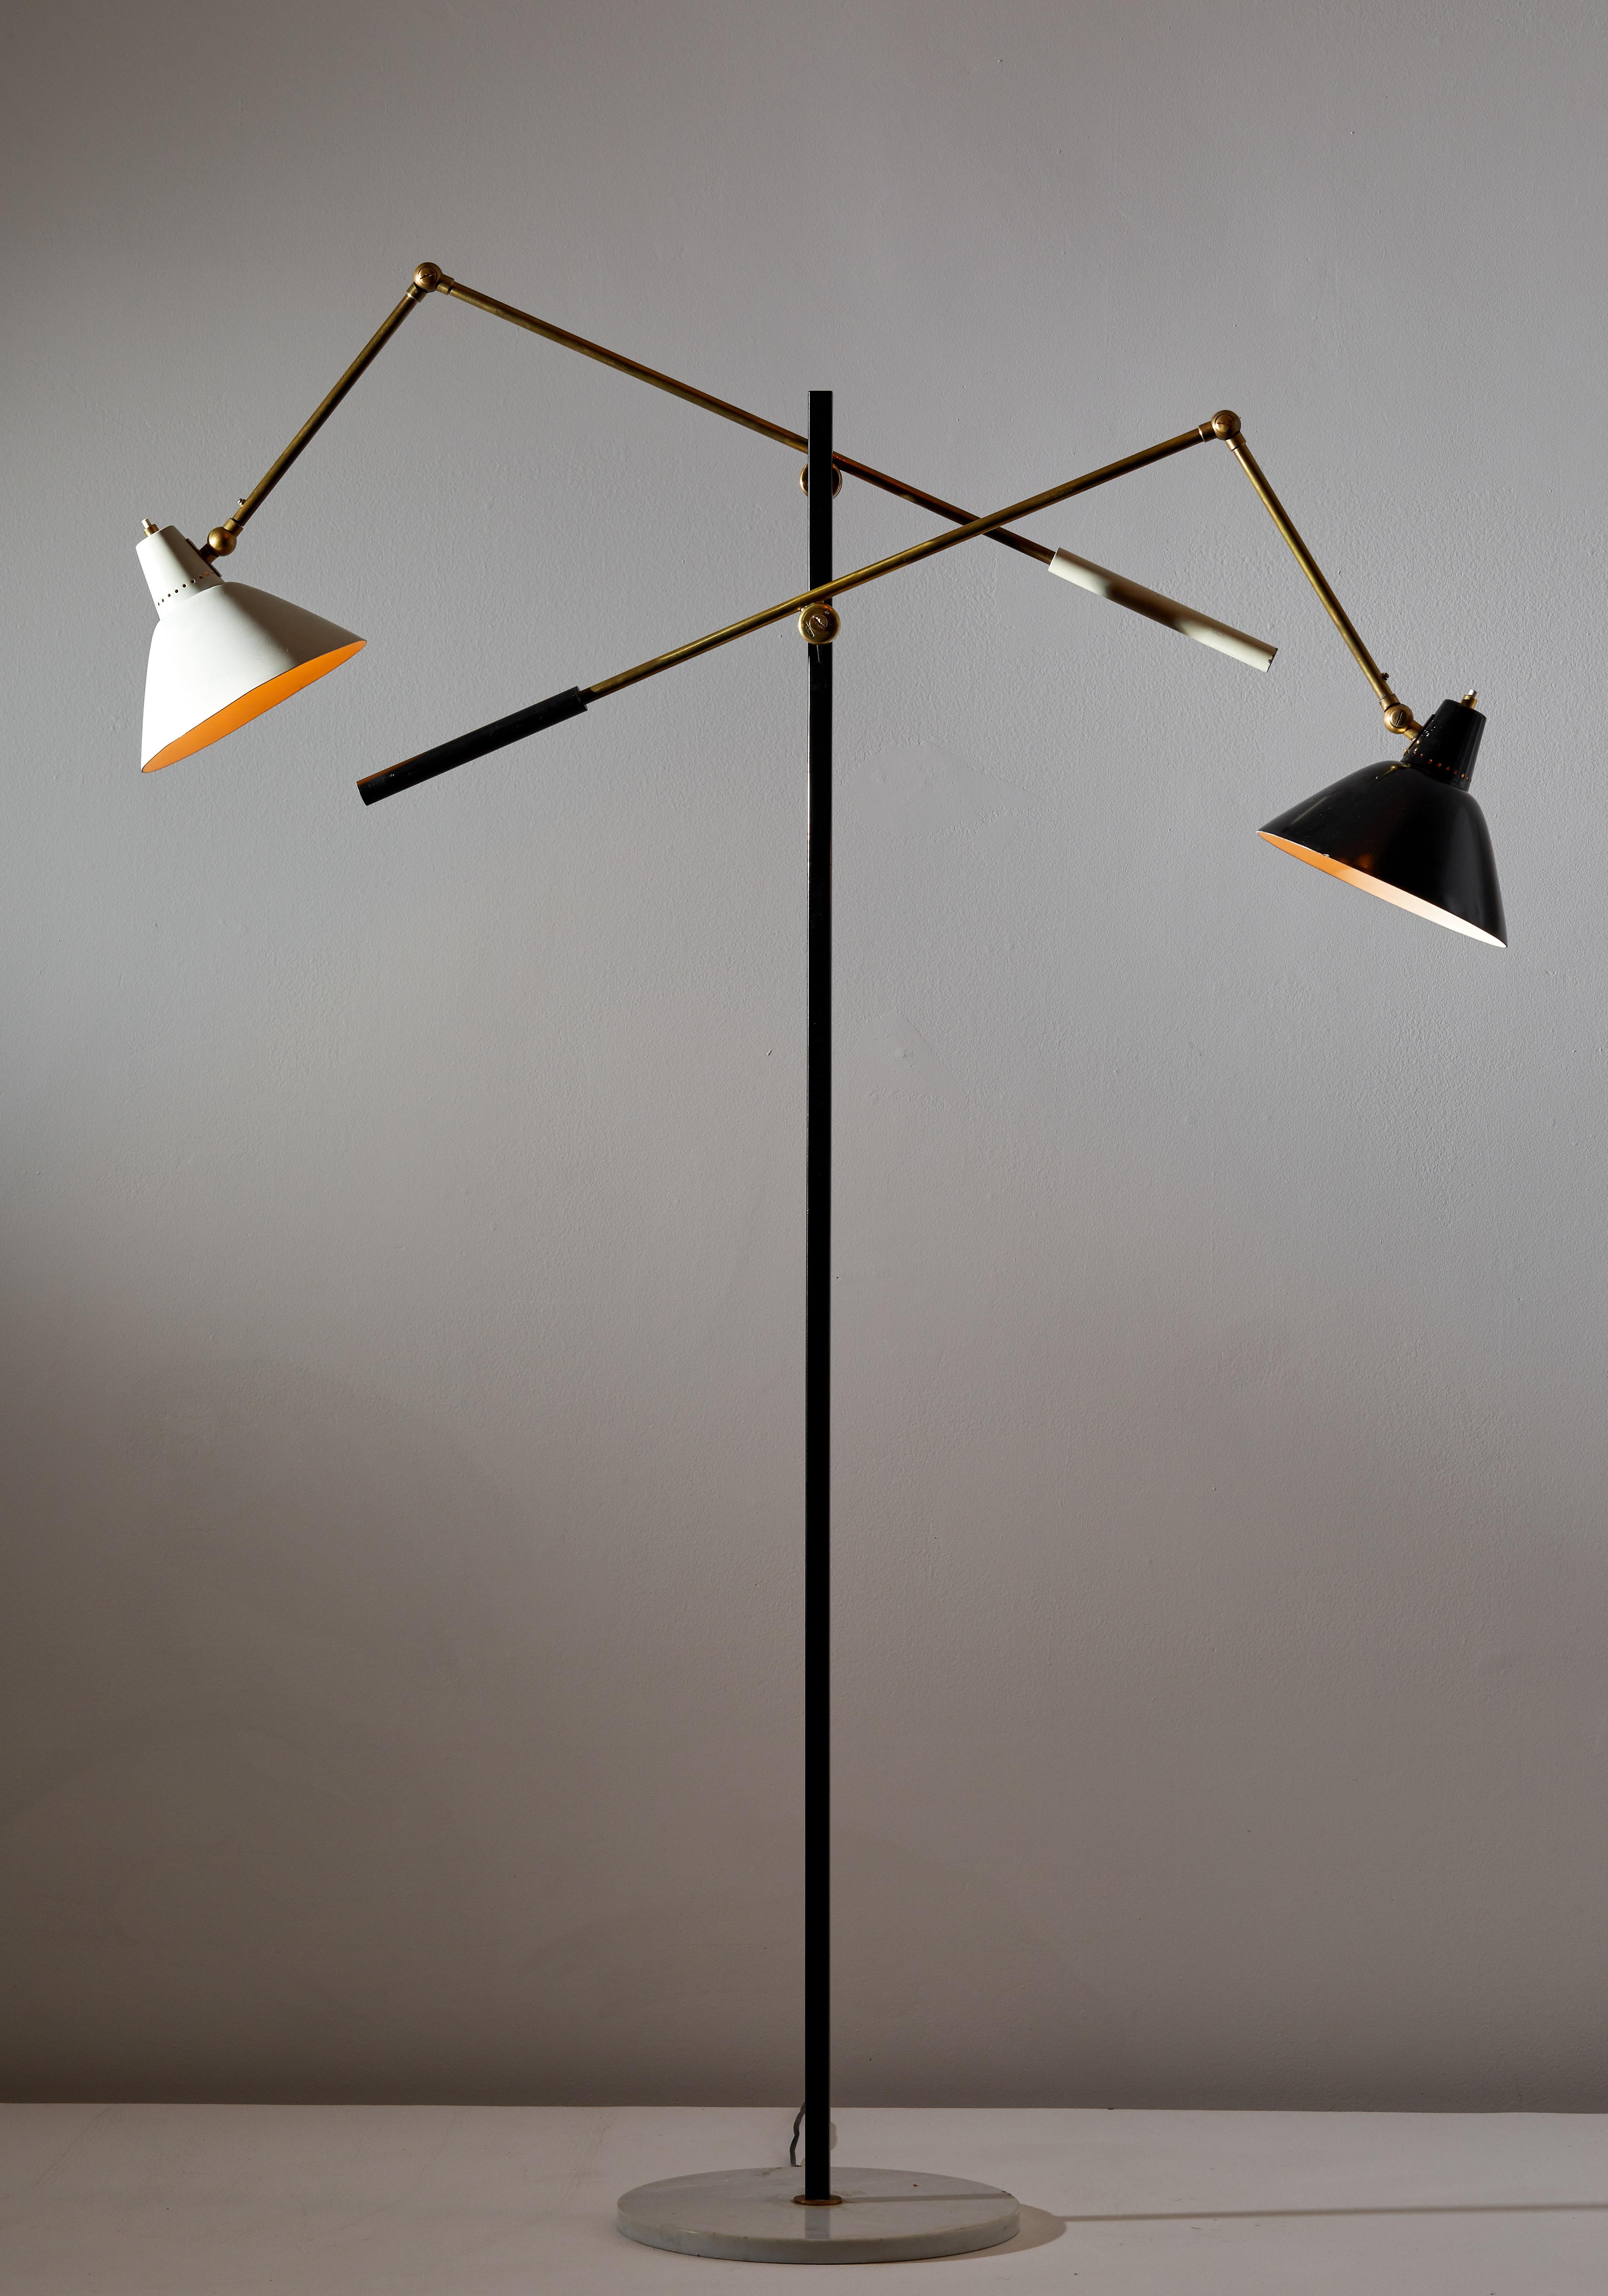 Two-arm floor lamp by Stilnovo. Manufactured in Italy, circa 1950s. Marble, brass, enameled metal. Arms and shades adjust to various positions. Rewired for U.S. sockets. Retains original manufacturer's label. Takes two E27 100w maximum bulbs. Bulbs